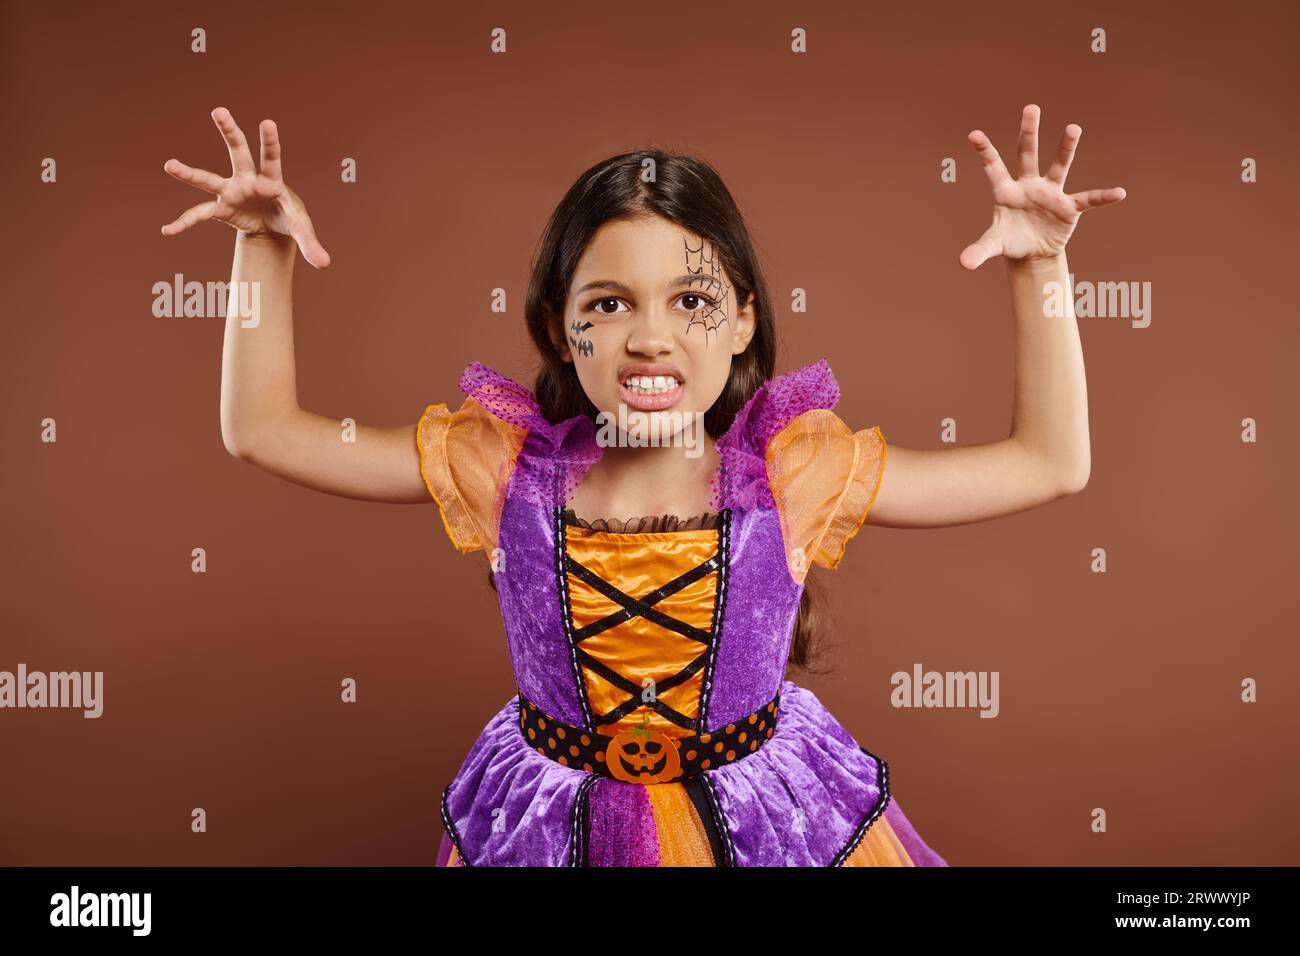 spooky child in Halloween costume with spiderweb makeup growling and gesturing on brown backdrop Stock Photo